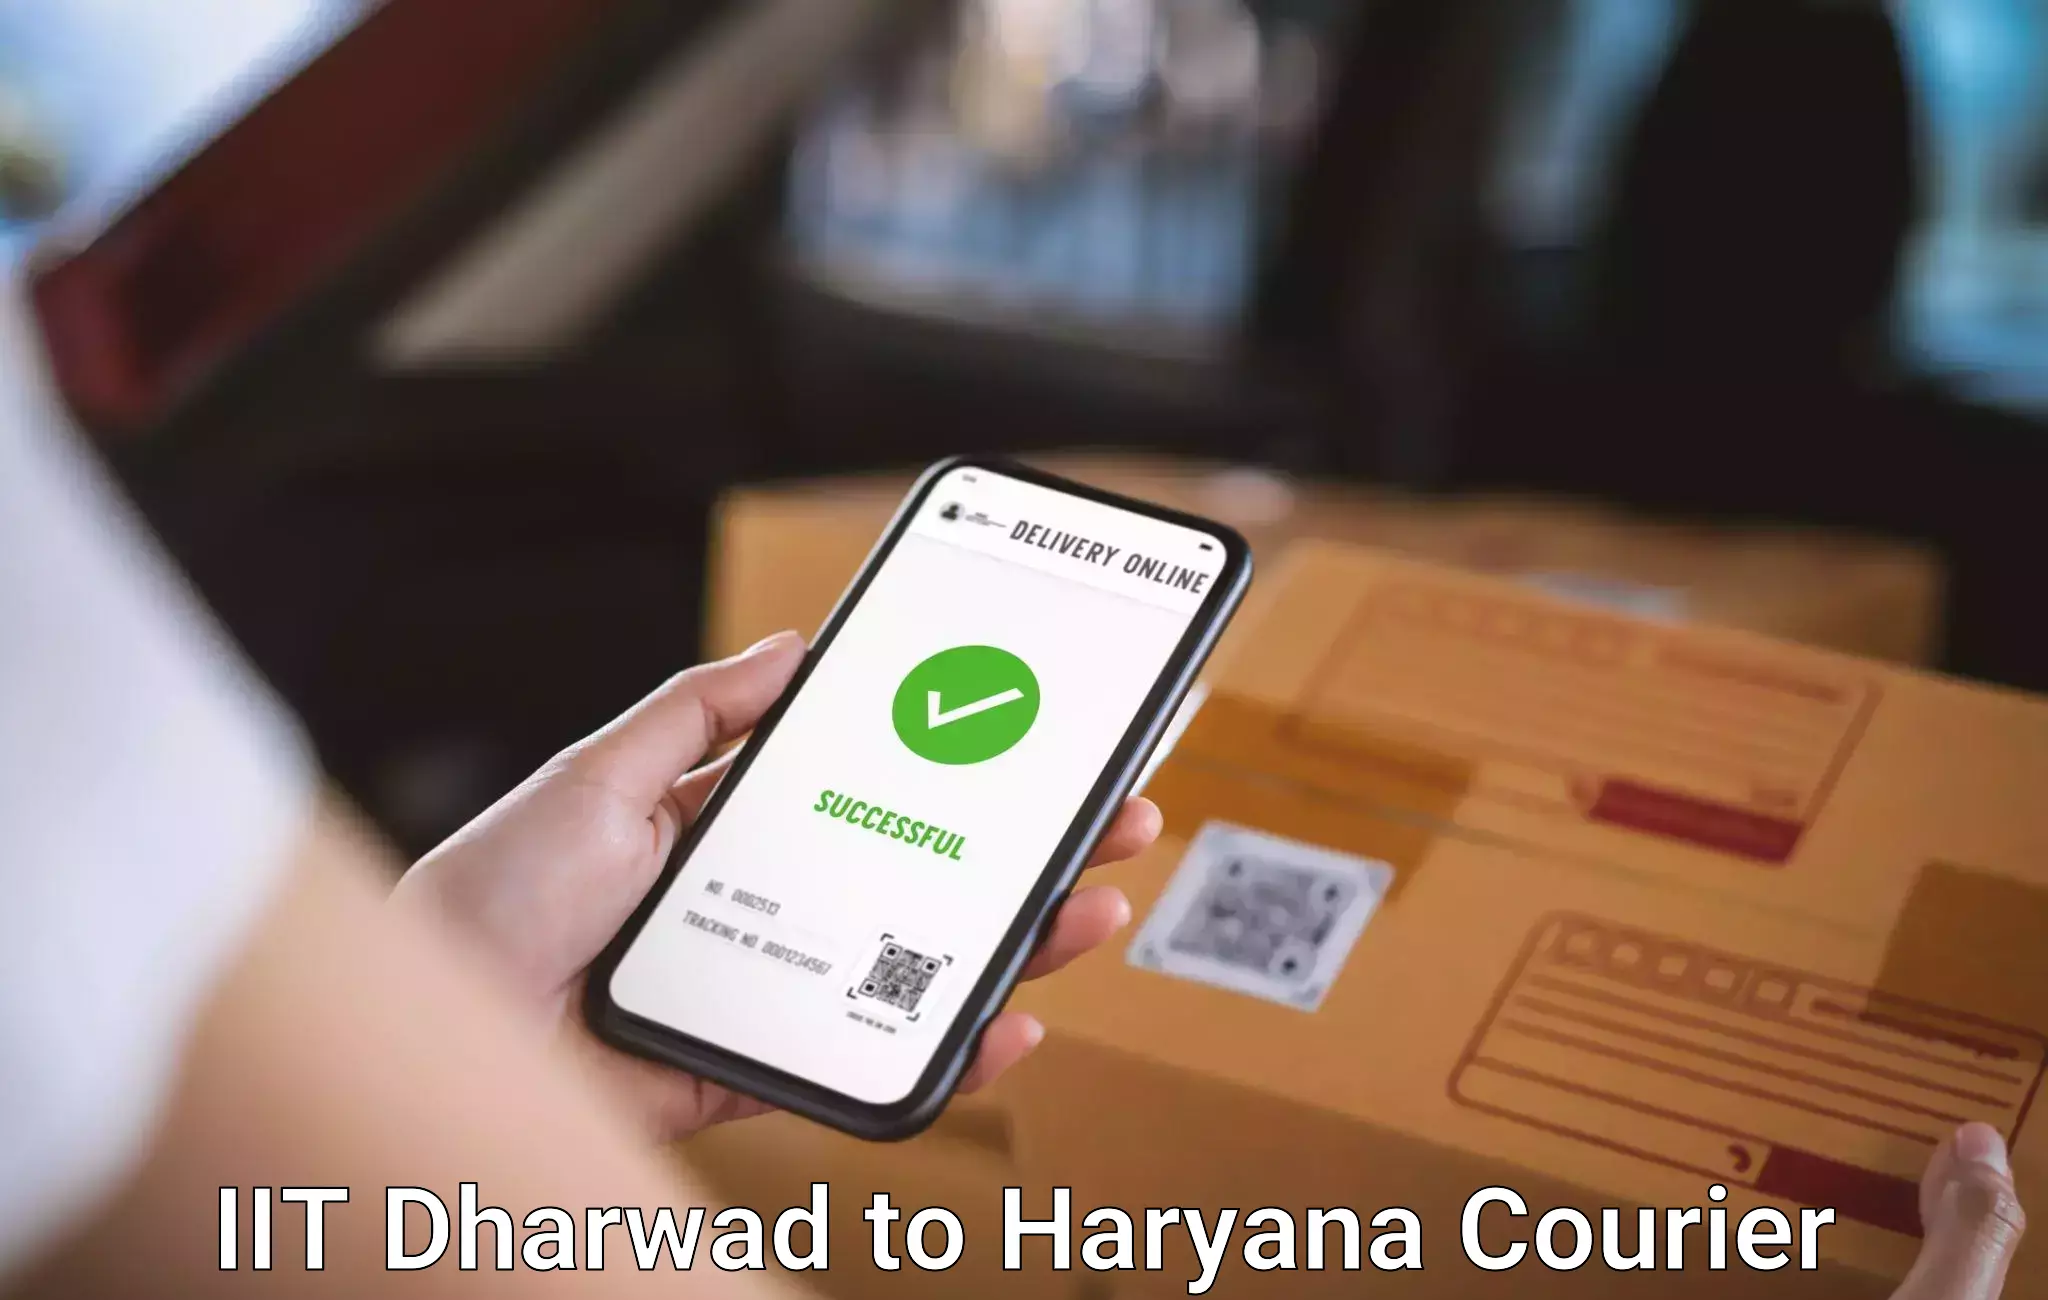 Luggage transfer service in IIT Dharwad to NCR Haryana